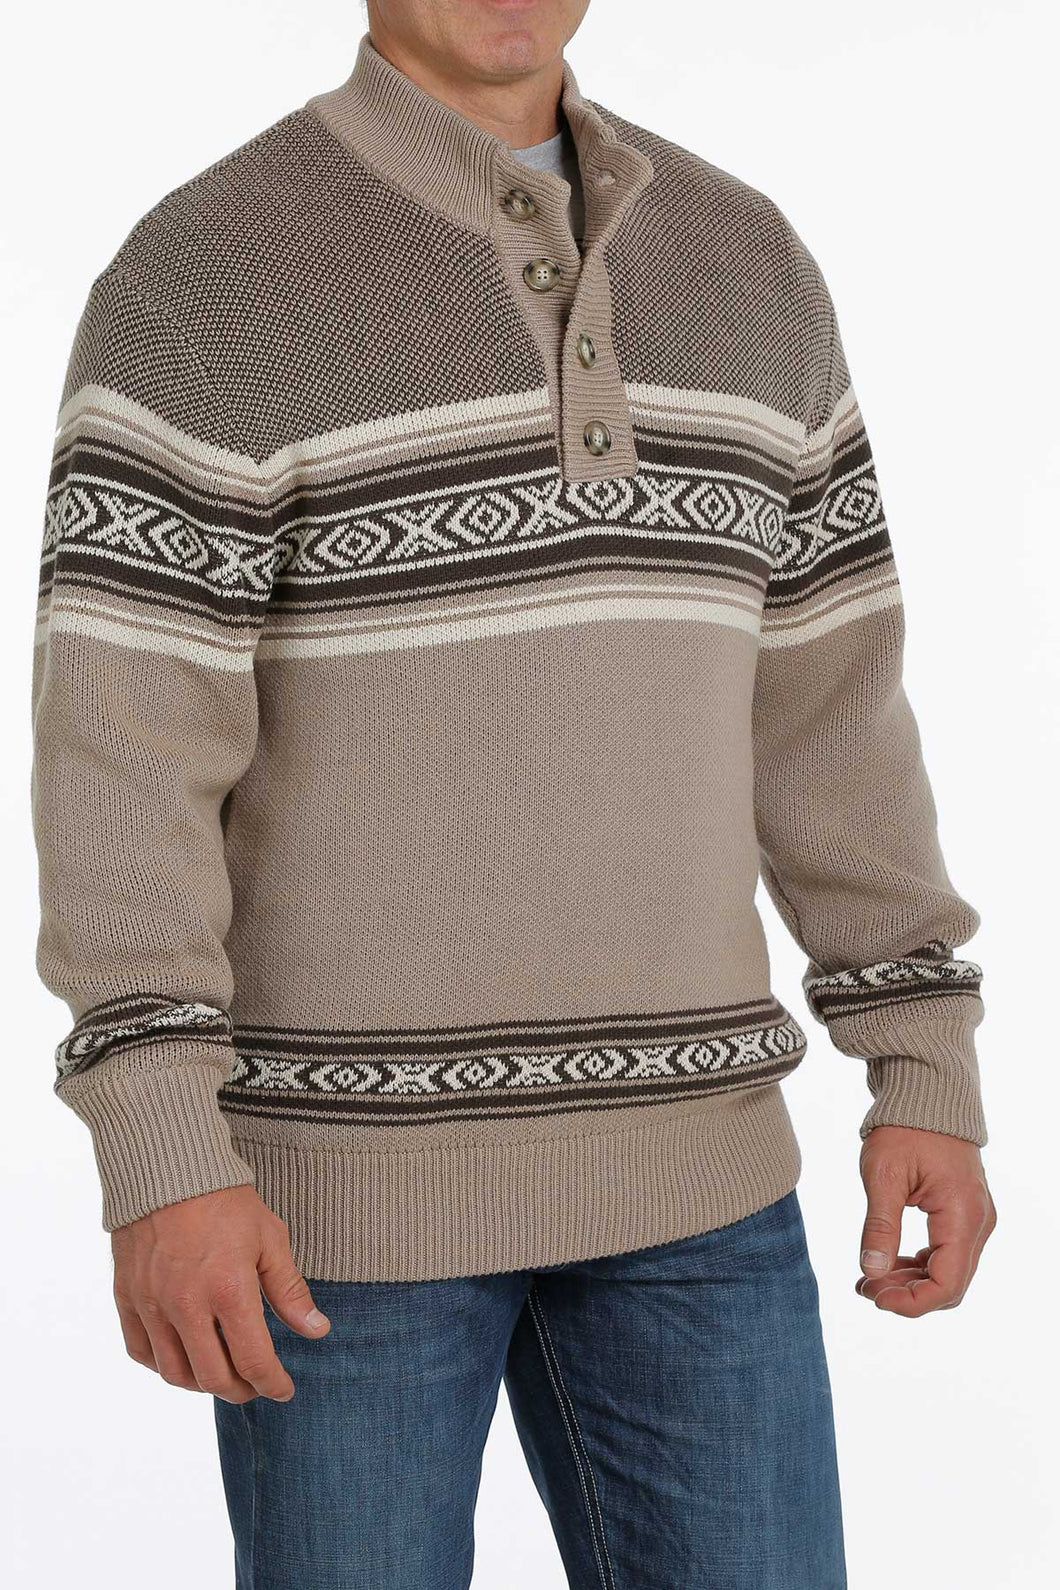 'Cinch' Men's 1/4 Button Lined Pullover Sweater - Stone